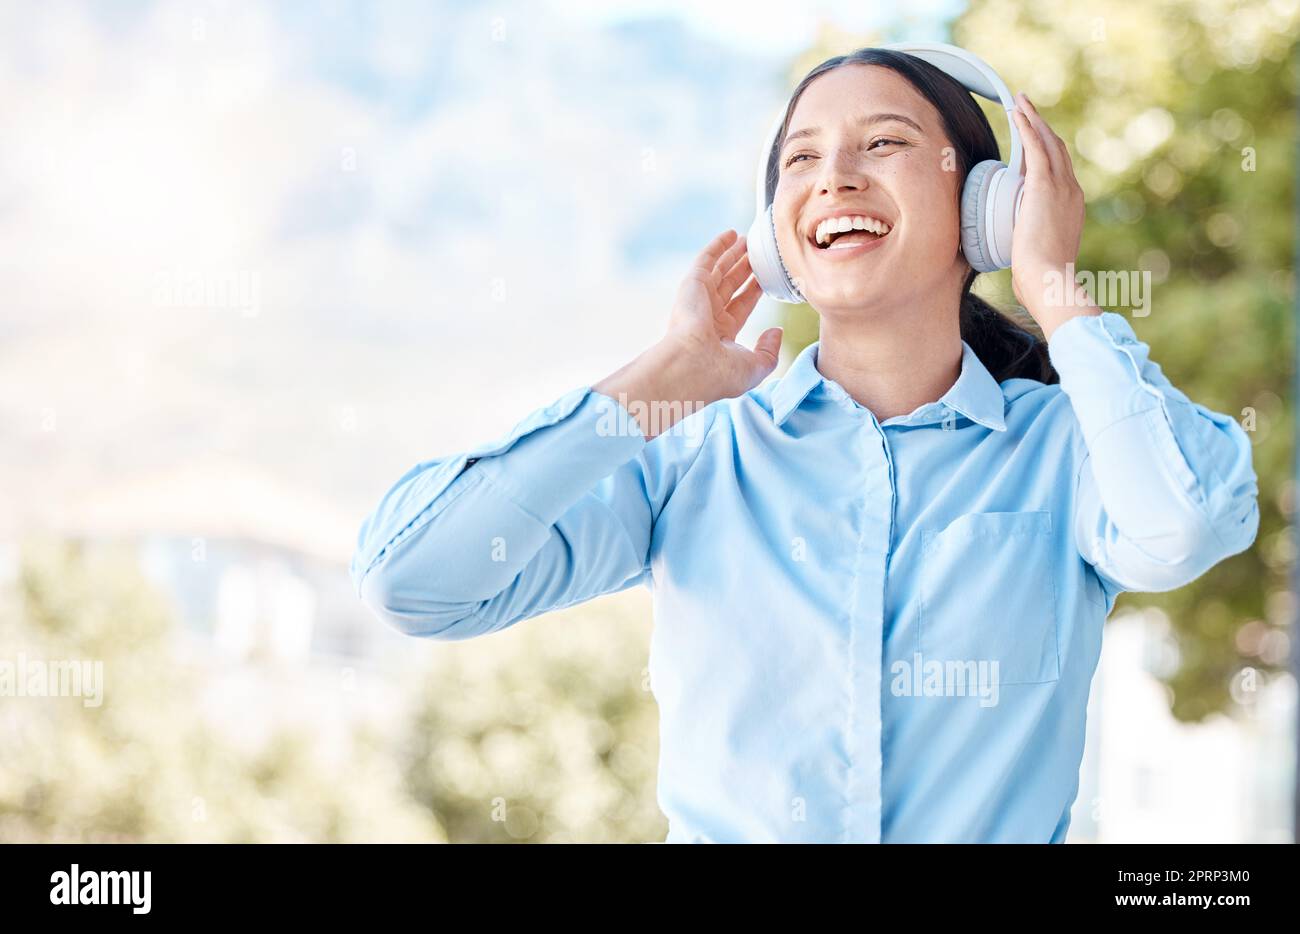 Woman with headphones happy listening to music on mp3 audio streaming song app singing to popular singer artist. Girl or young person smile, happiness and dancing to good internet joy and fun radio Stock Photo